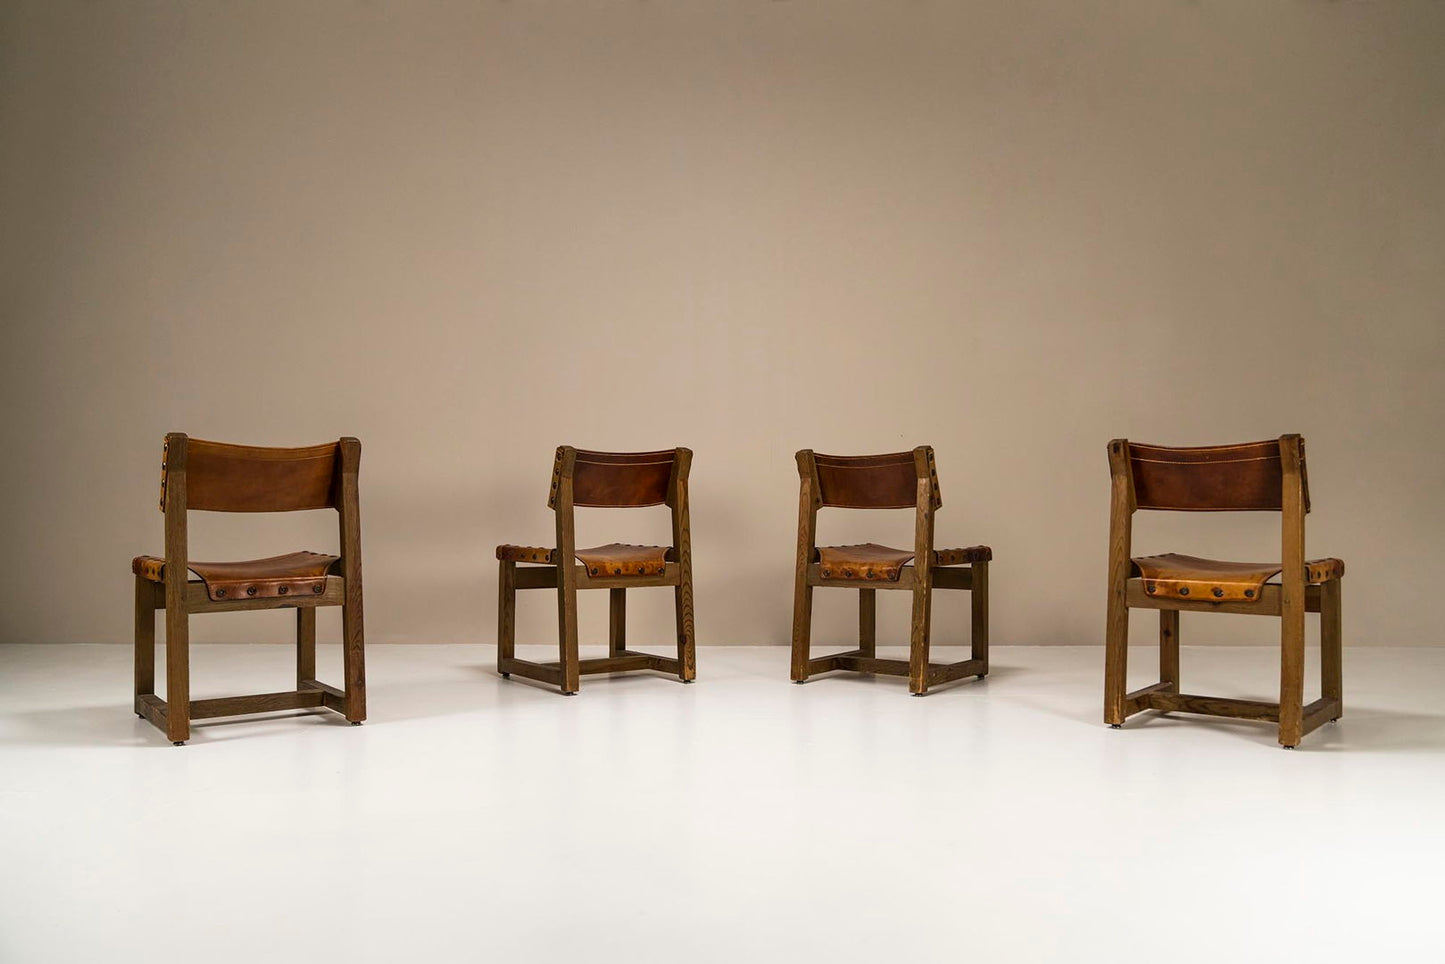 Biosca Set Of 4 Chairs In Pine And Cognac Saddle Leather, Spain 1960s